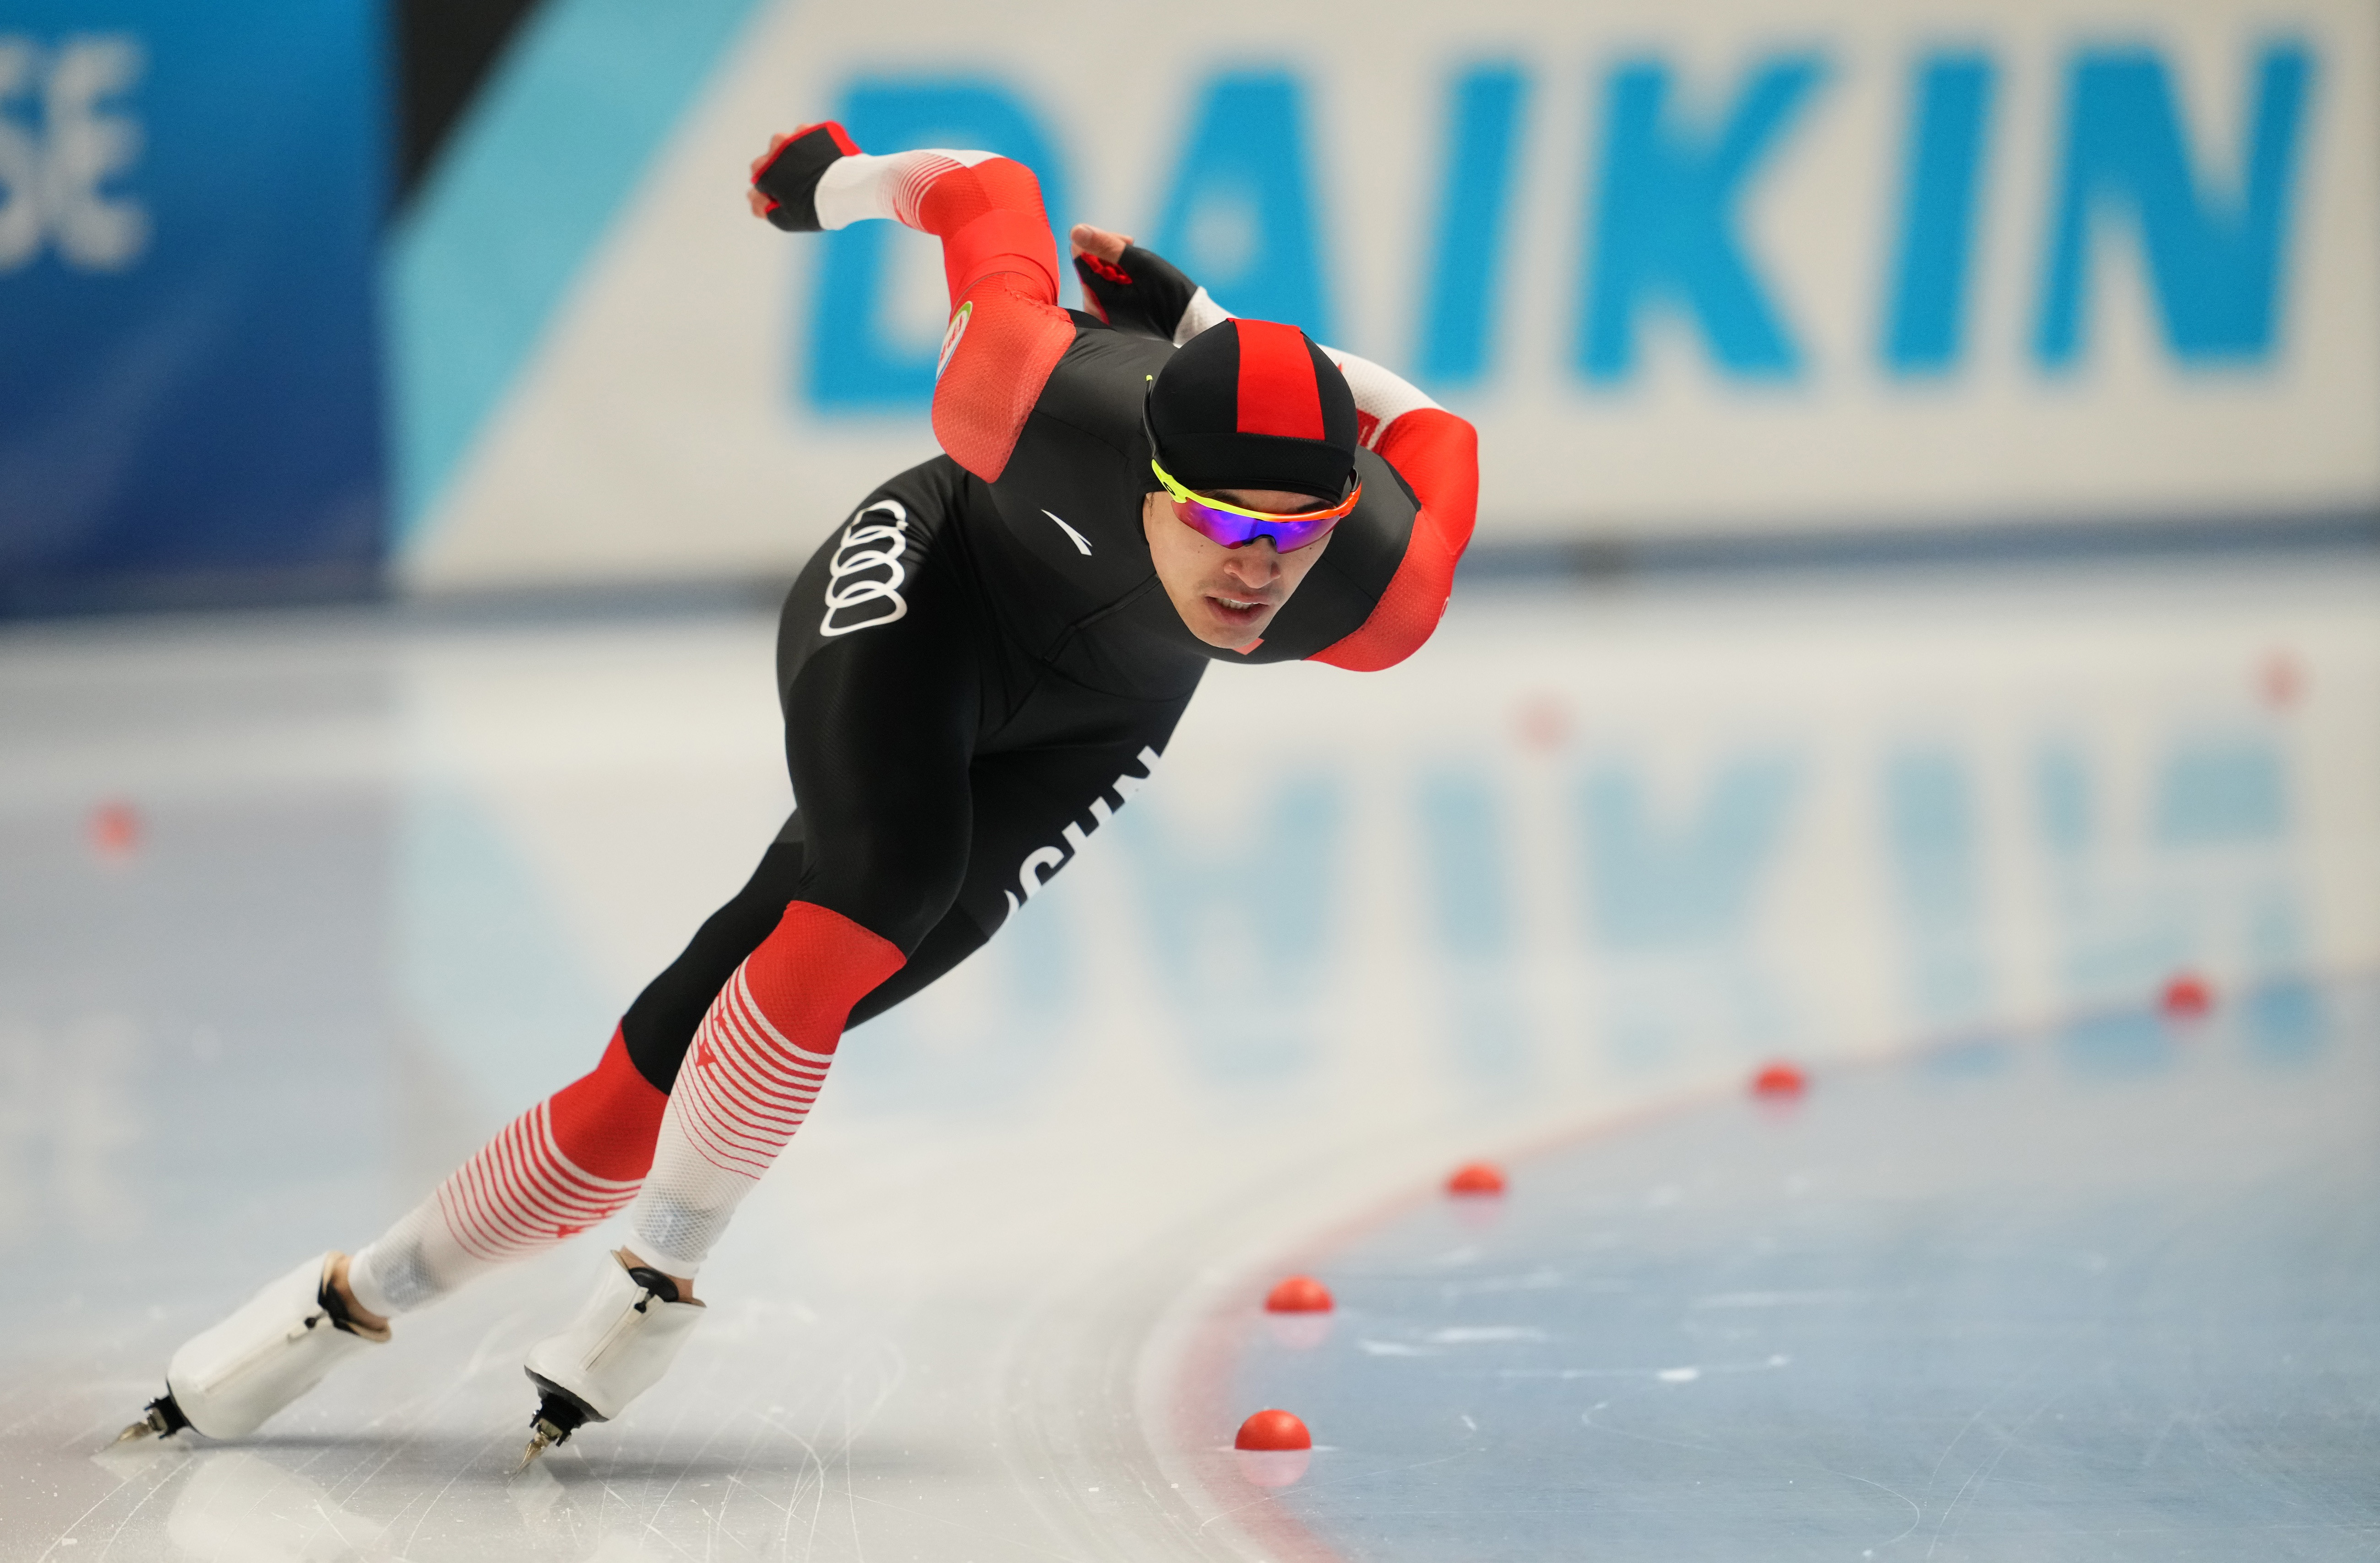 Ning wins gold in men's 1,500m final at World Cup | Reuters